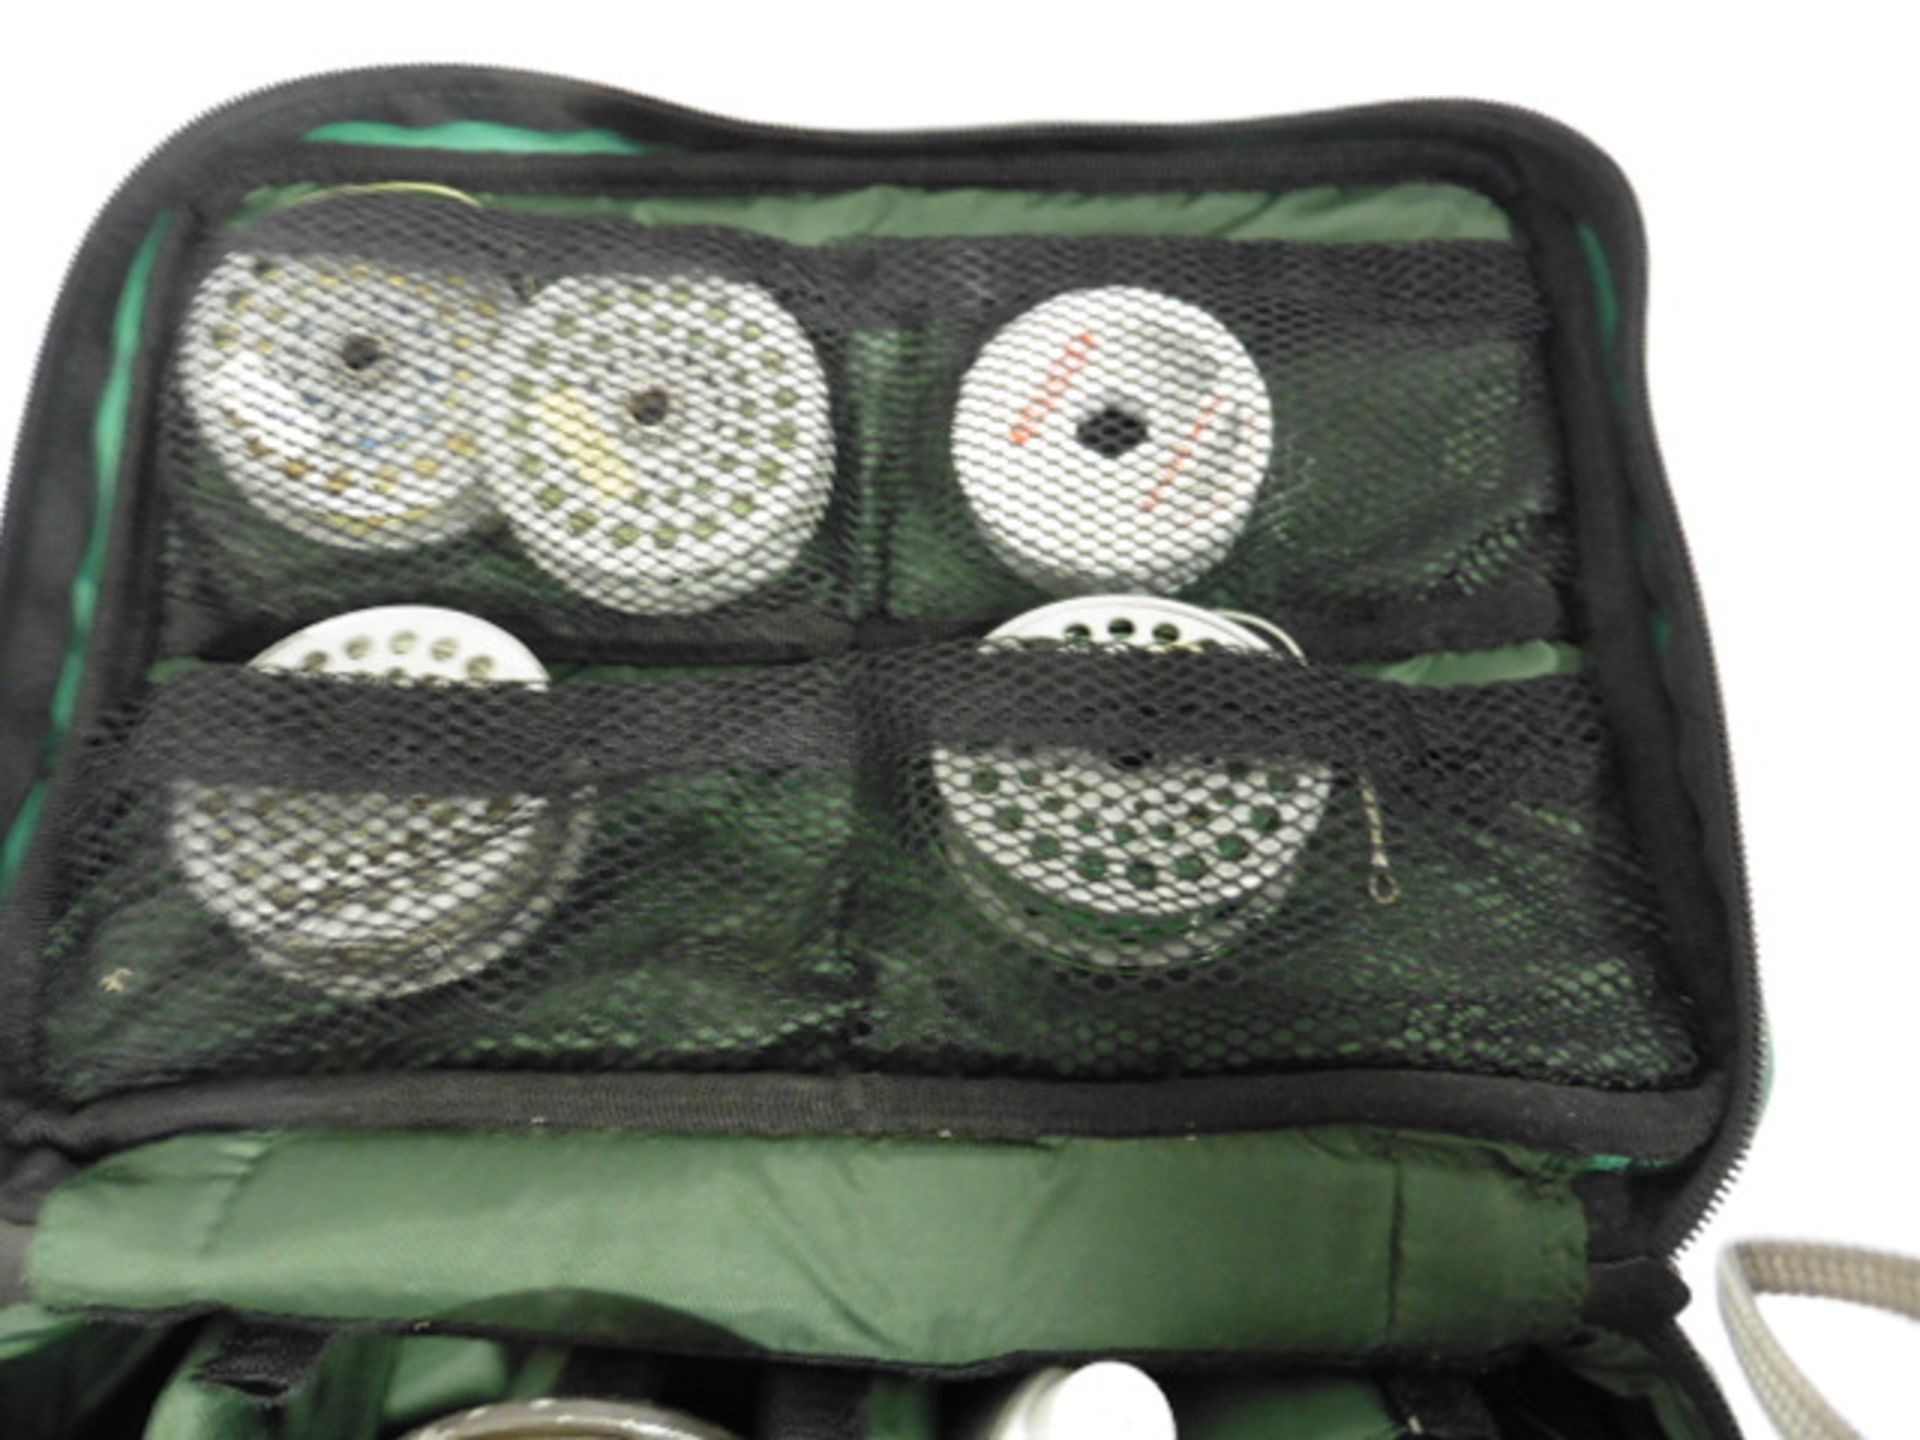 Daiwa Alltmor case with contents of Fly fishing reels, spare spools, line etc - Image 3 of 4